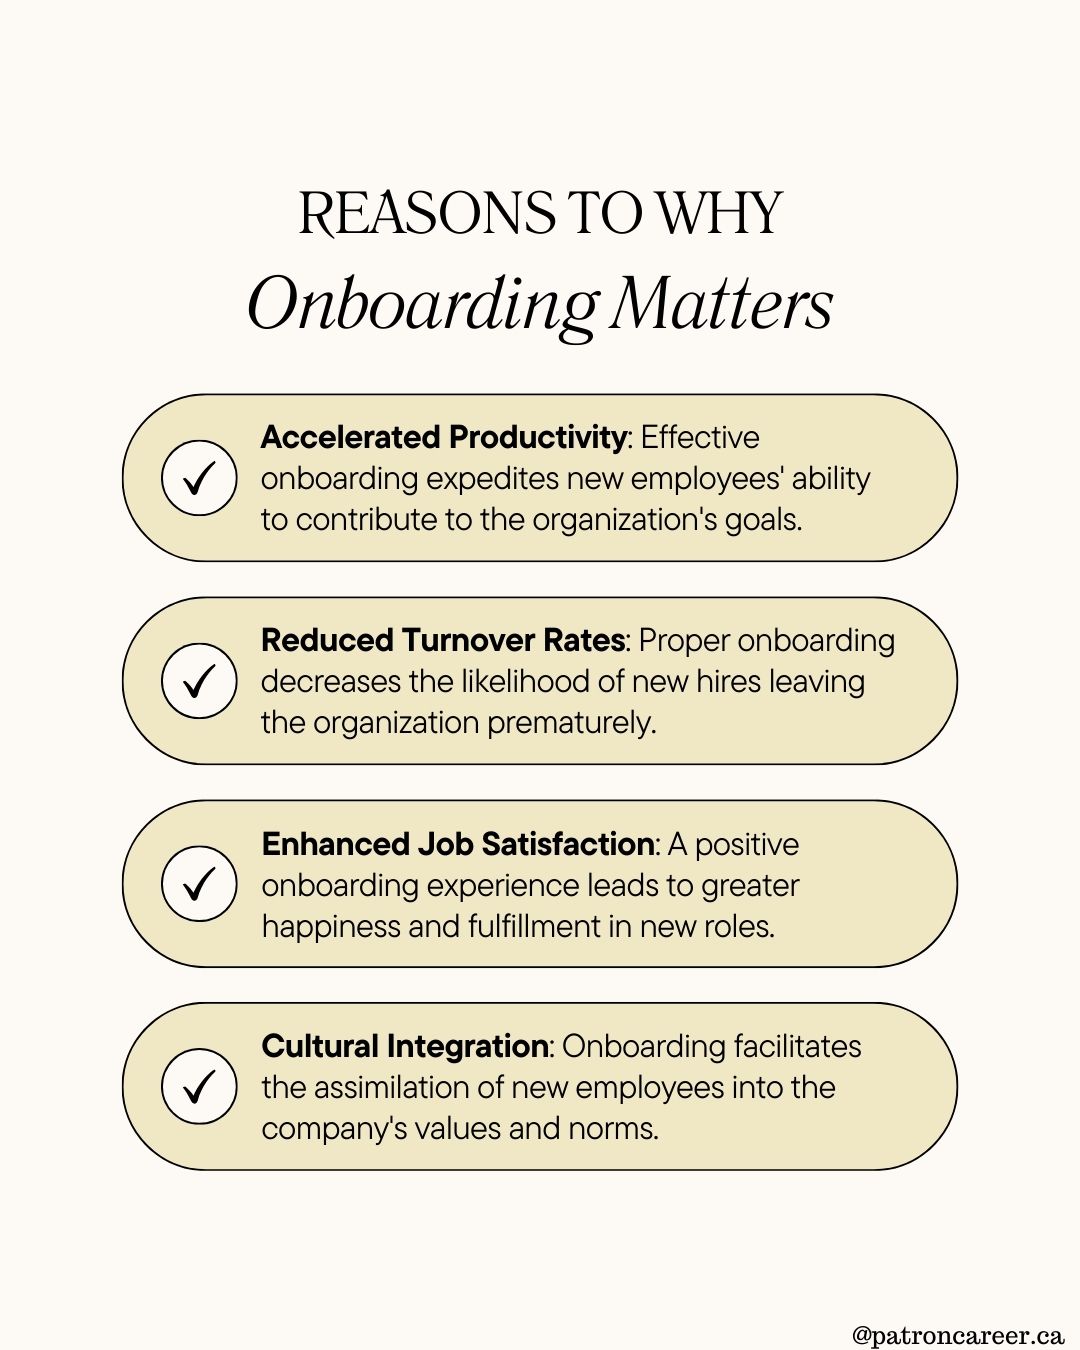 Reasons to why onboarding matters